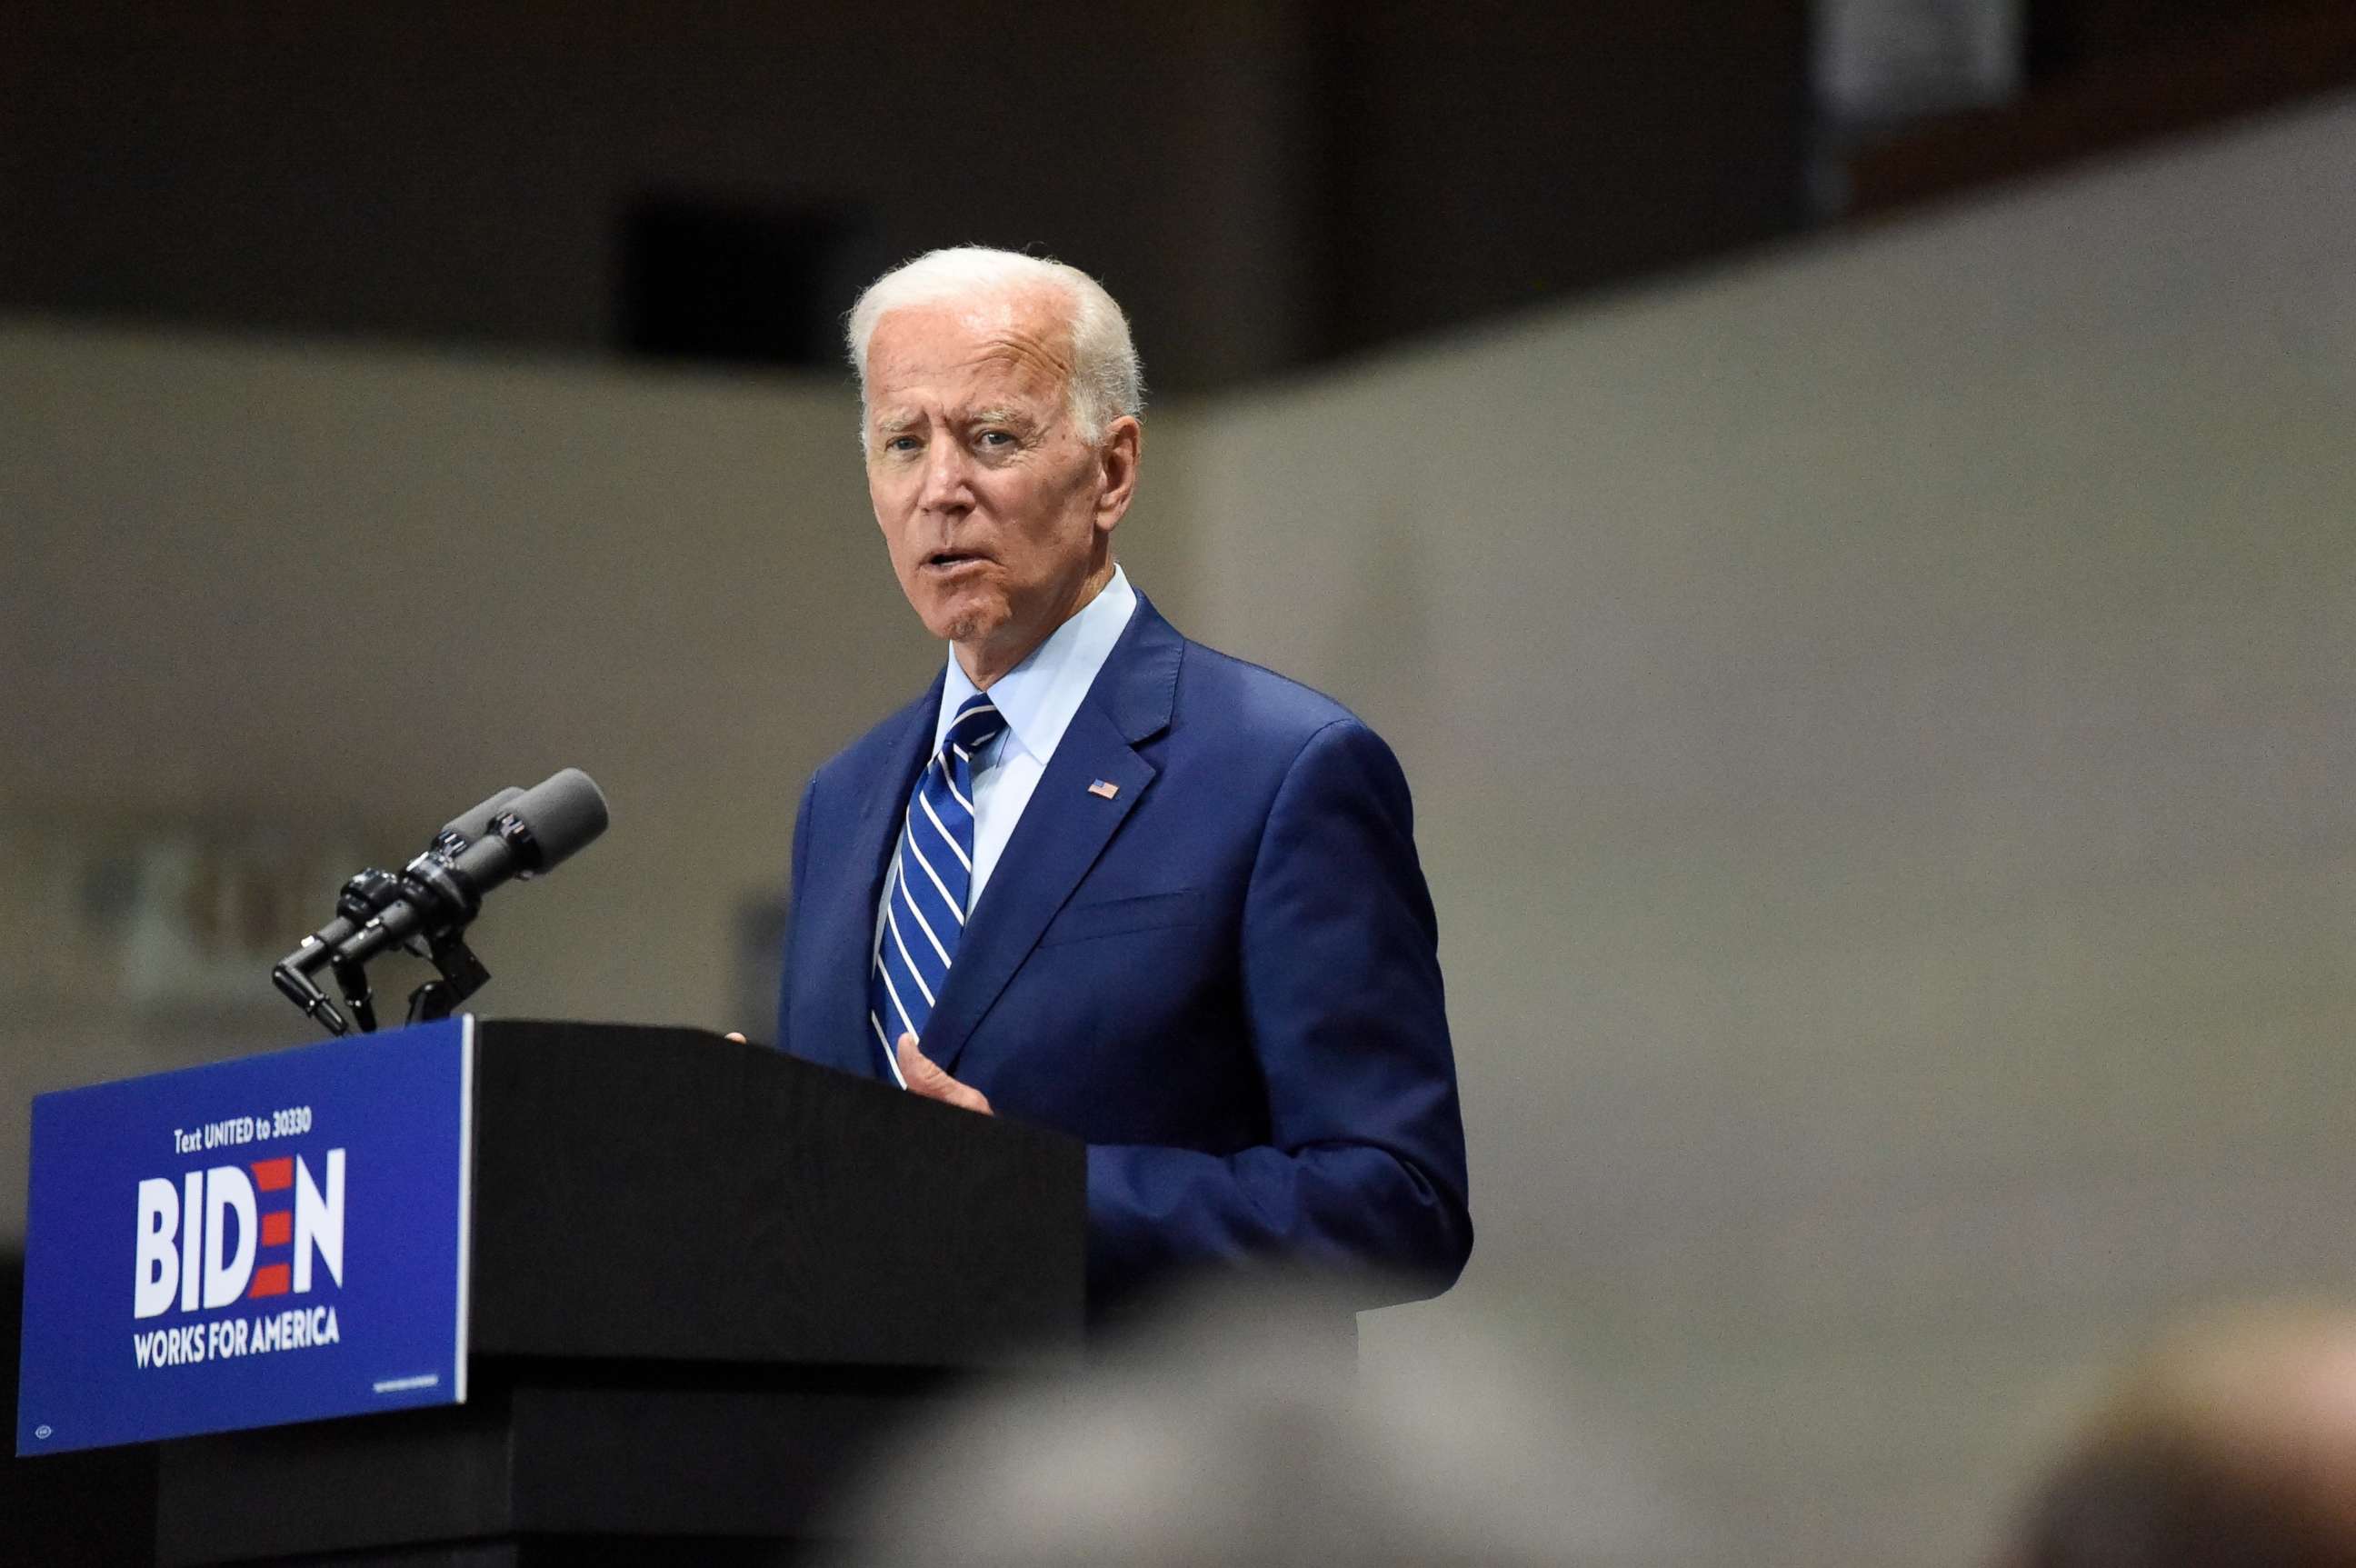 PHOTO: Democratic presidential candidate and former vice president Joe Biden speaks at a campaign event in Sumter, S.C., July 6, 2019. 